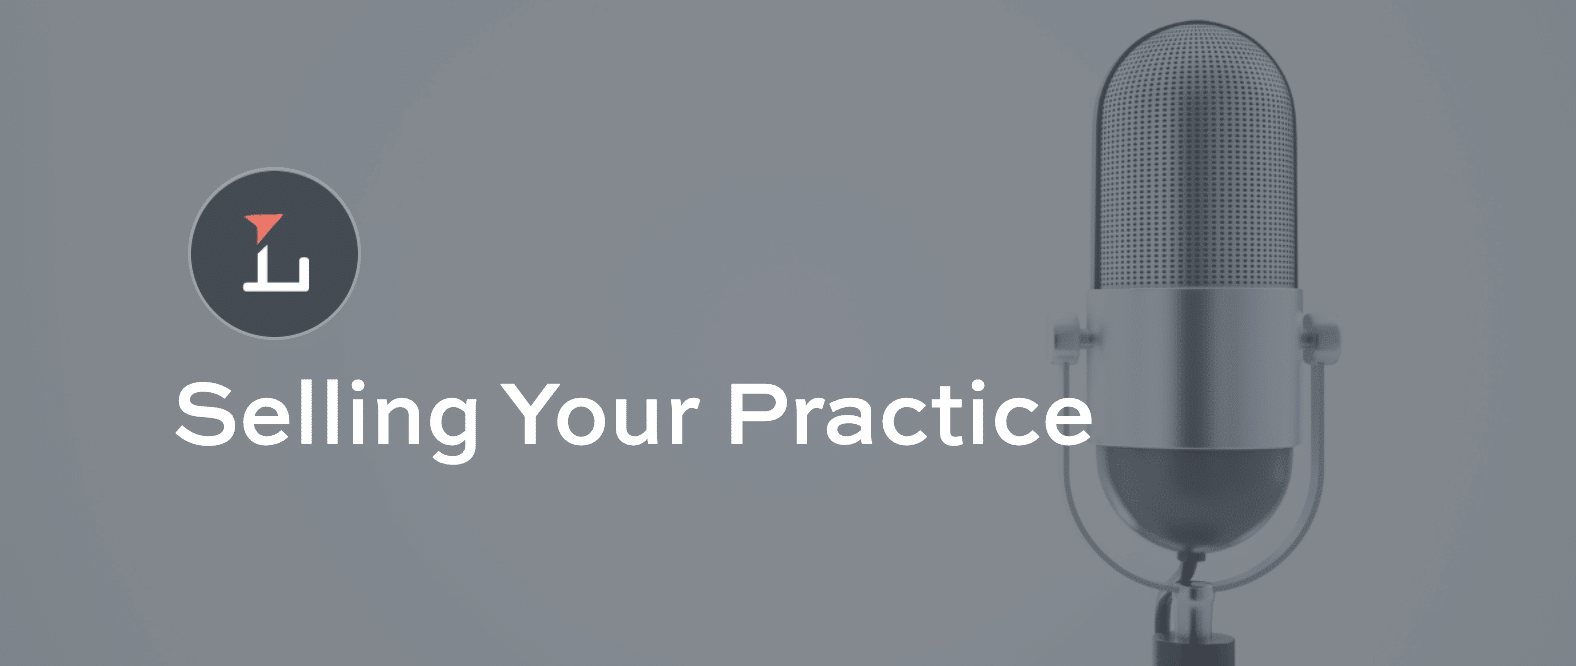 Selling your practice